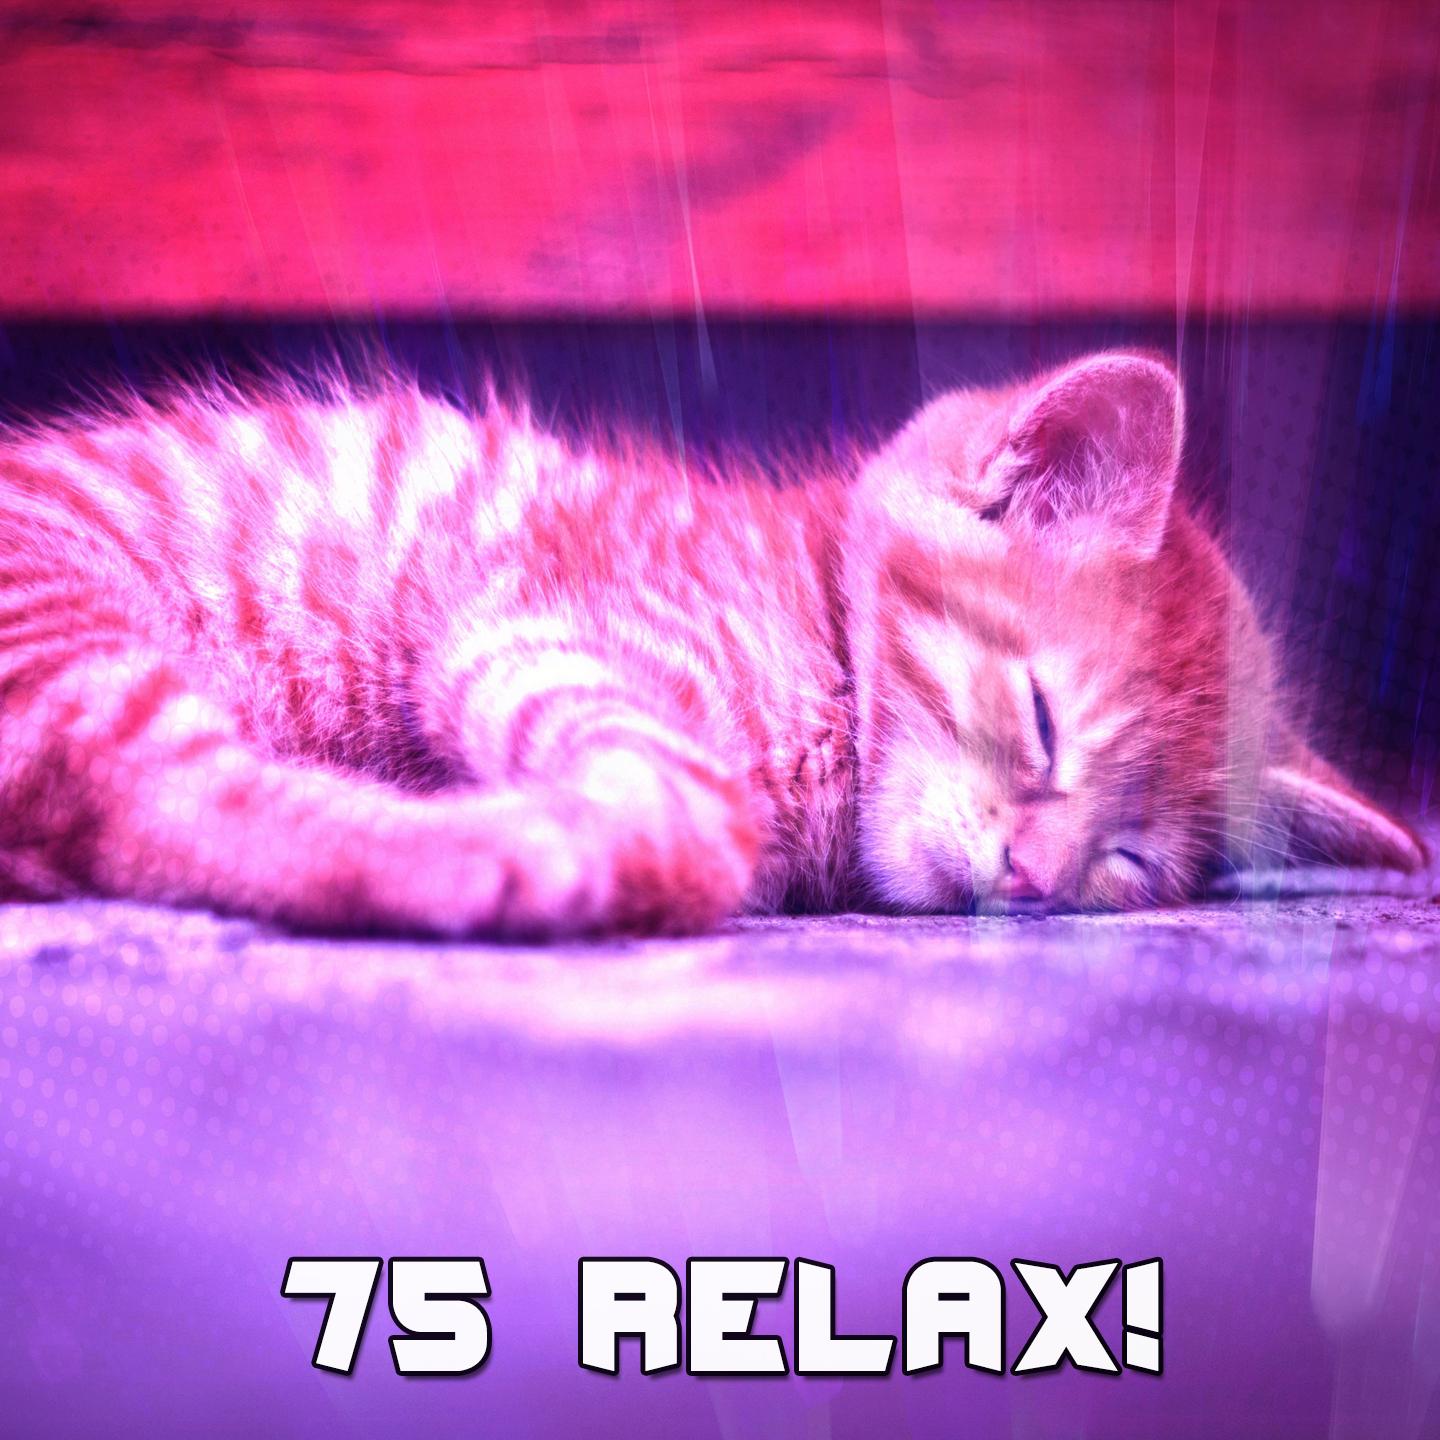 75 Relax!